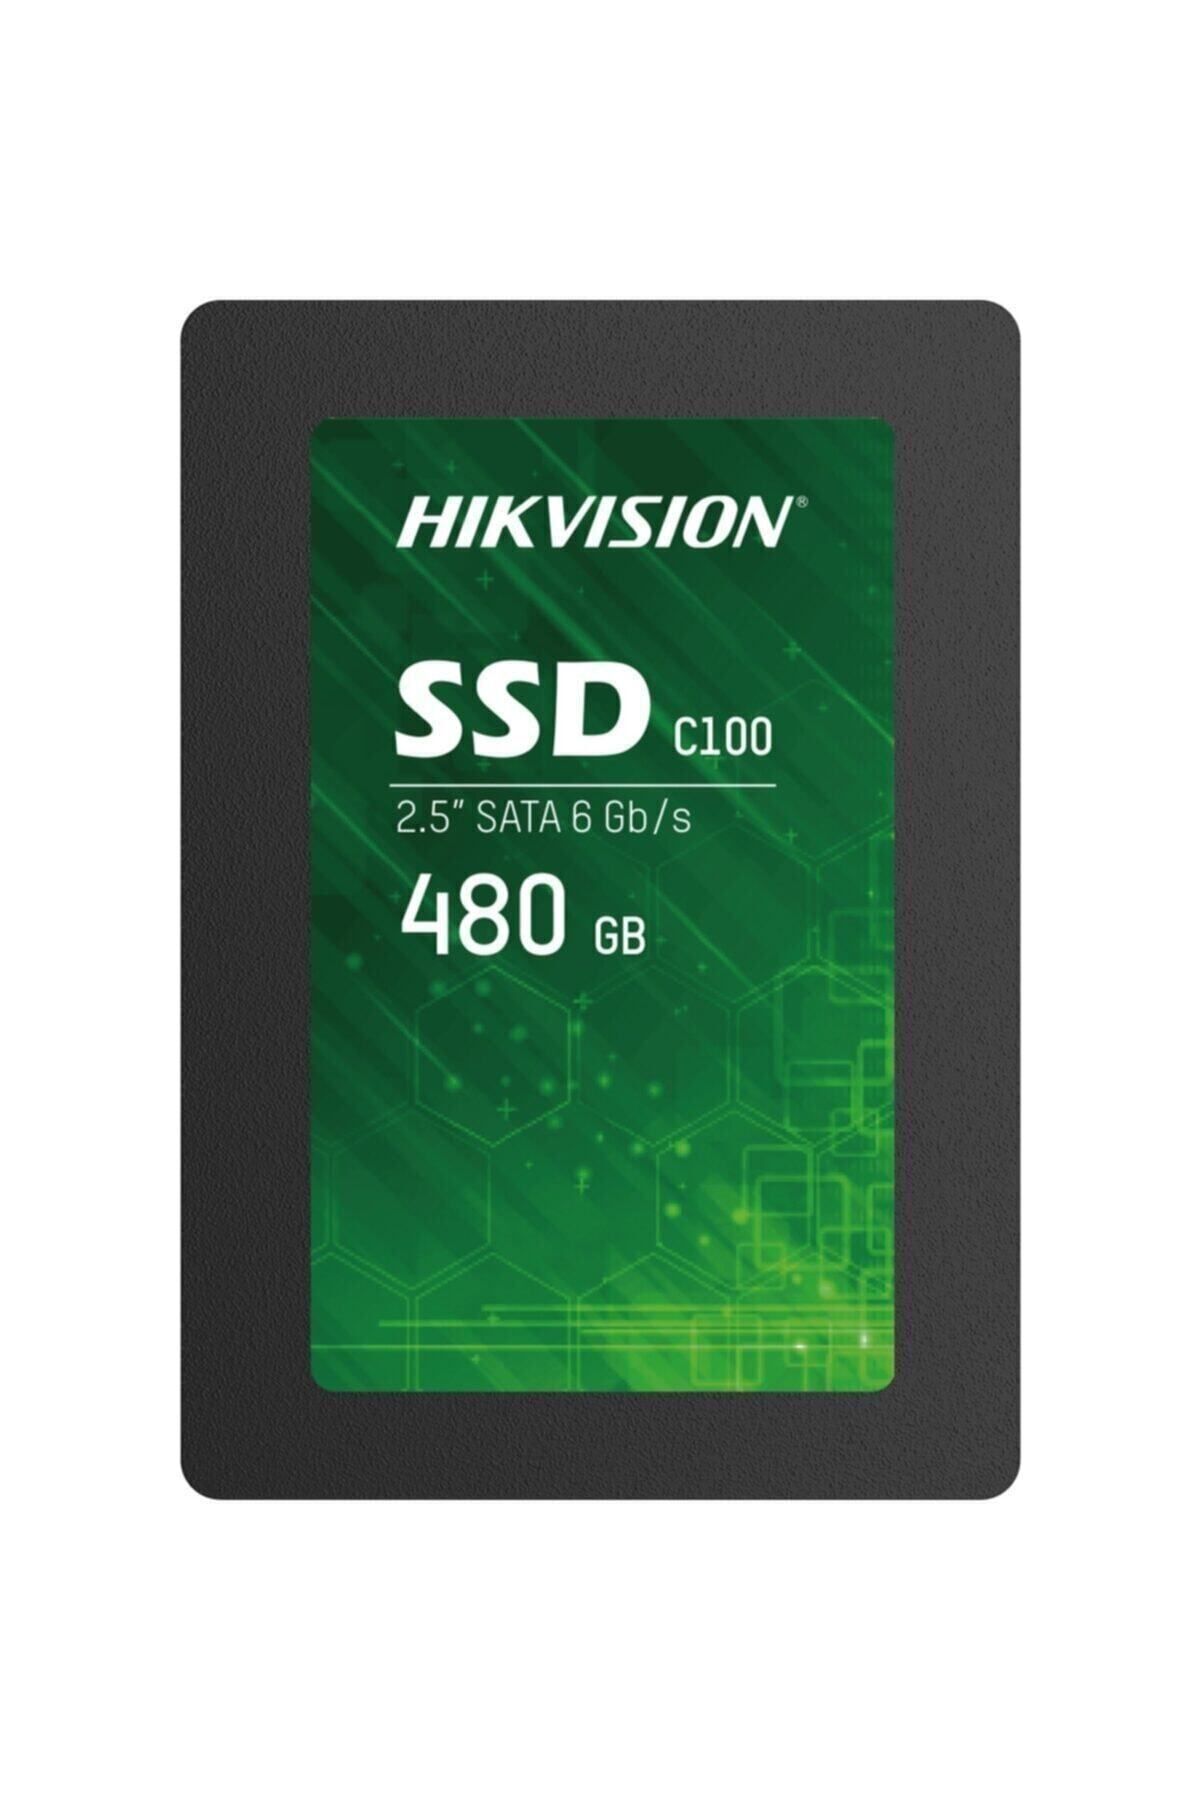 Hikvision Ssd C100 480g